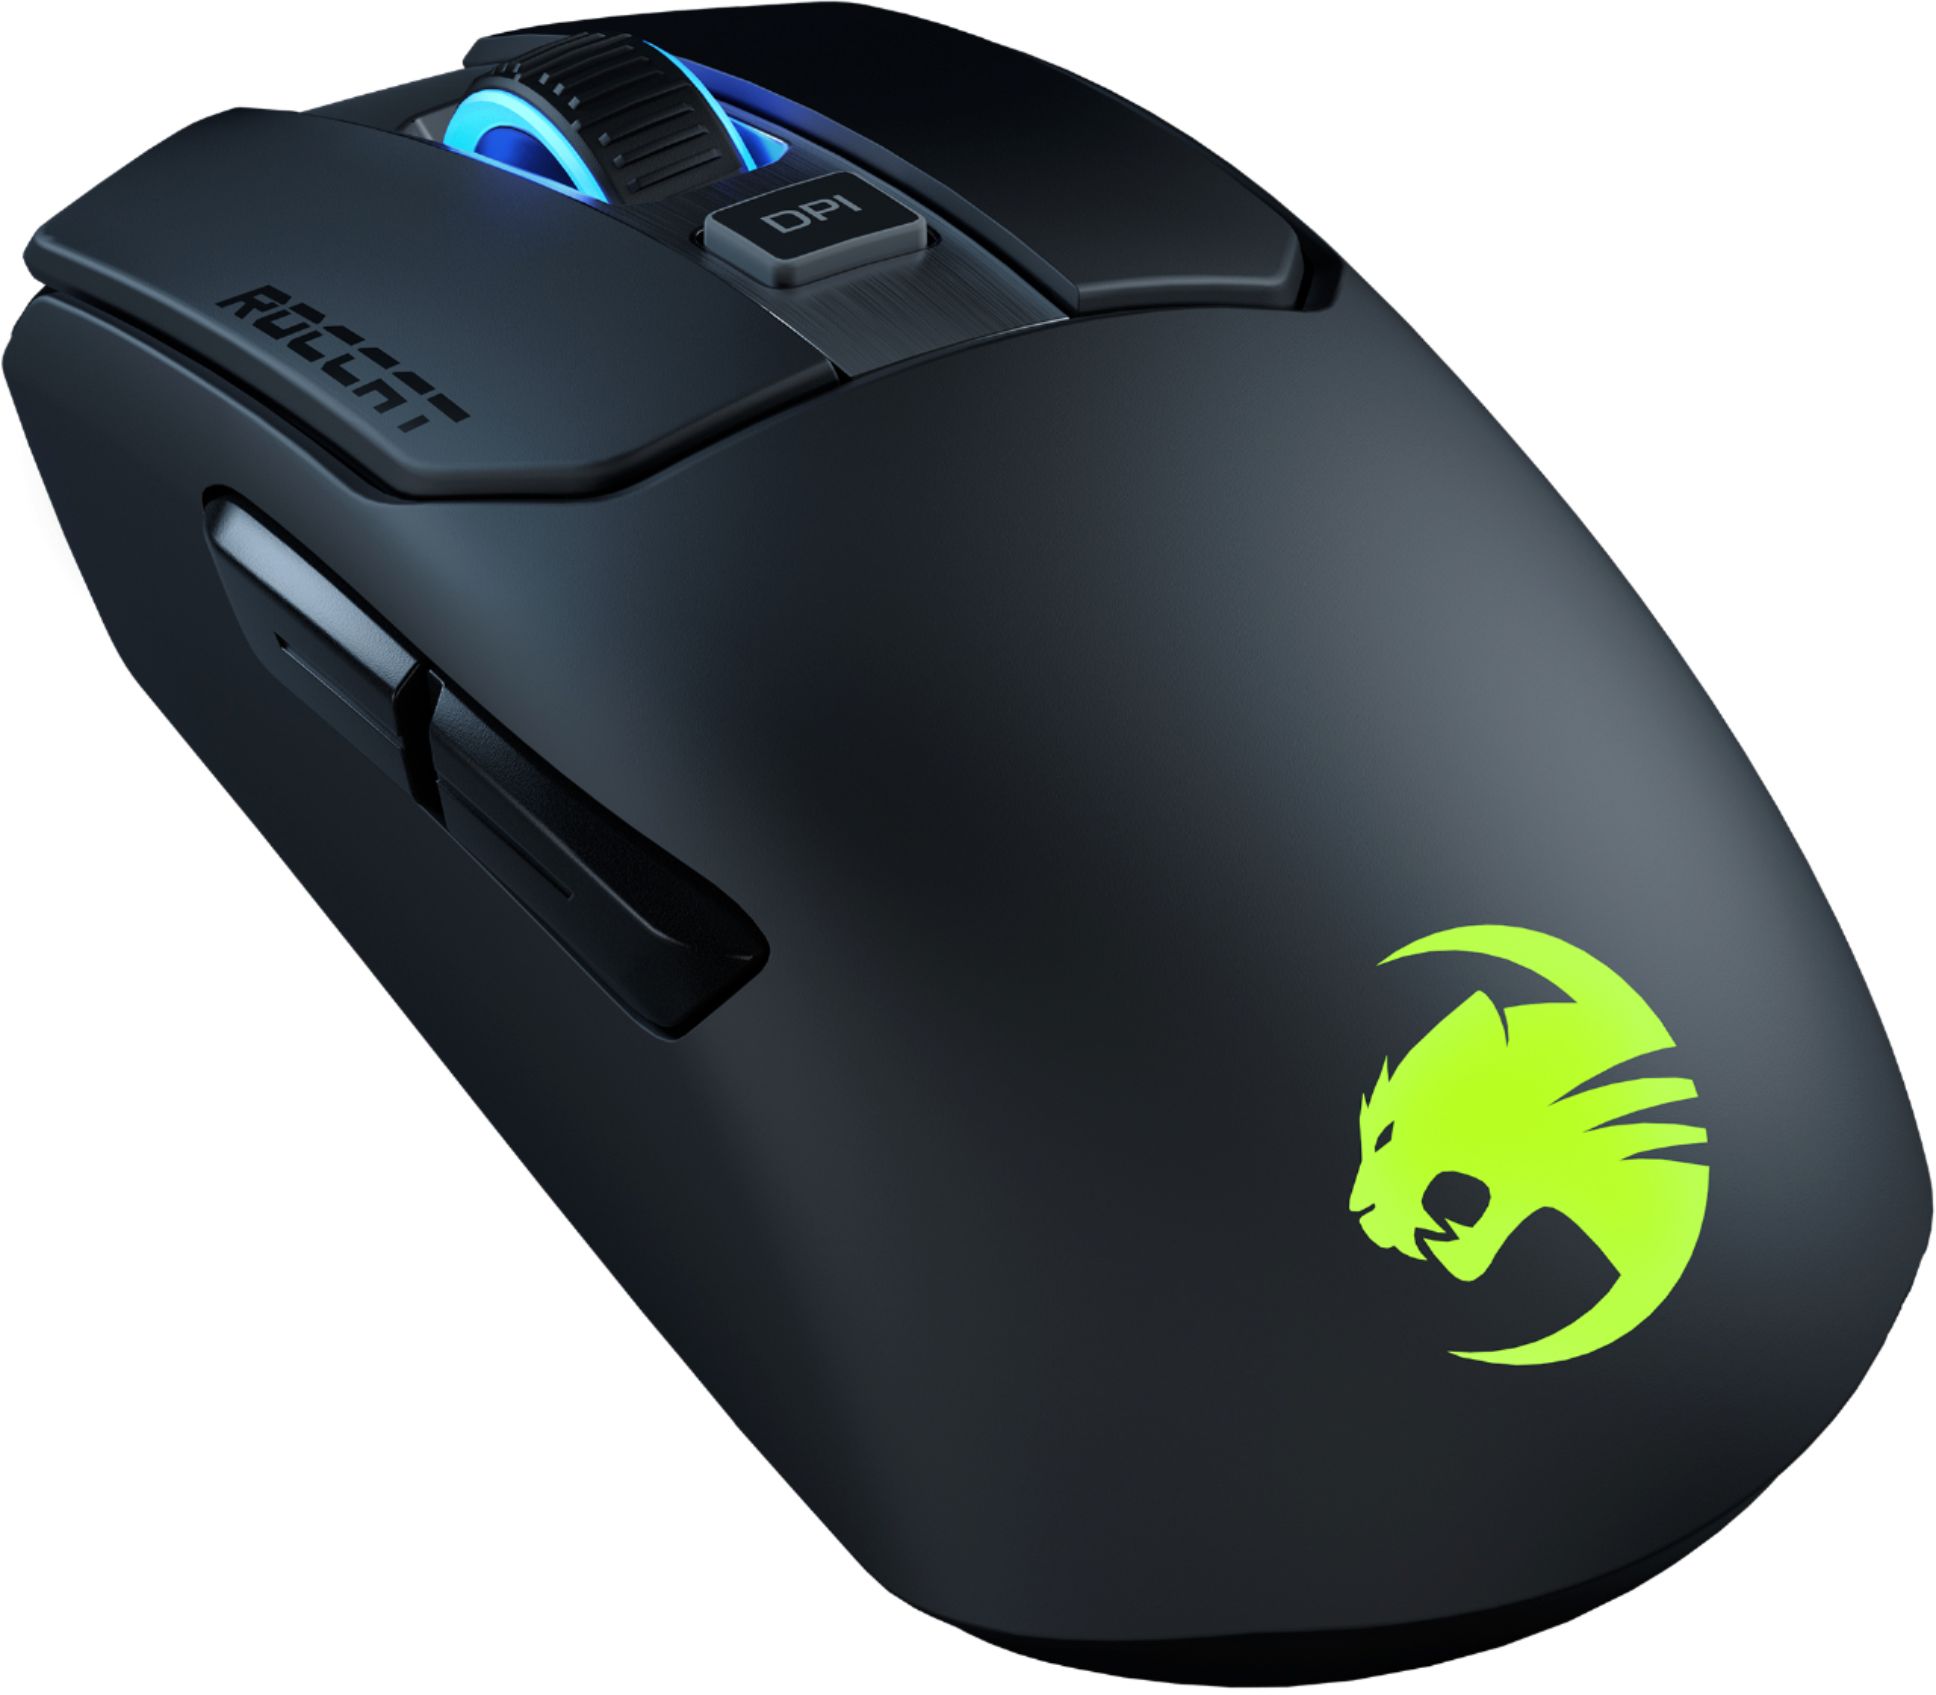 Rocket Cane 200 AIMO Gaming Mouse